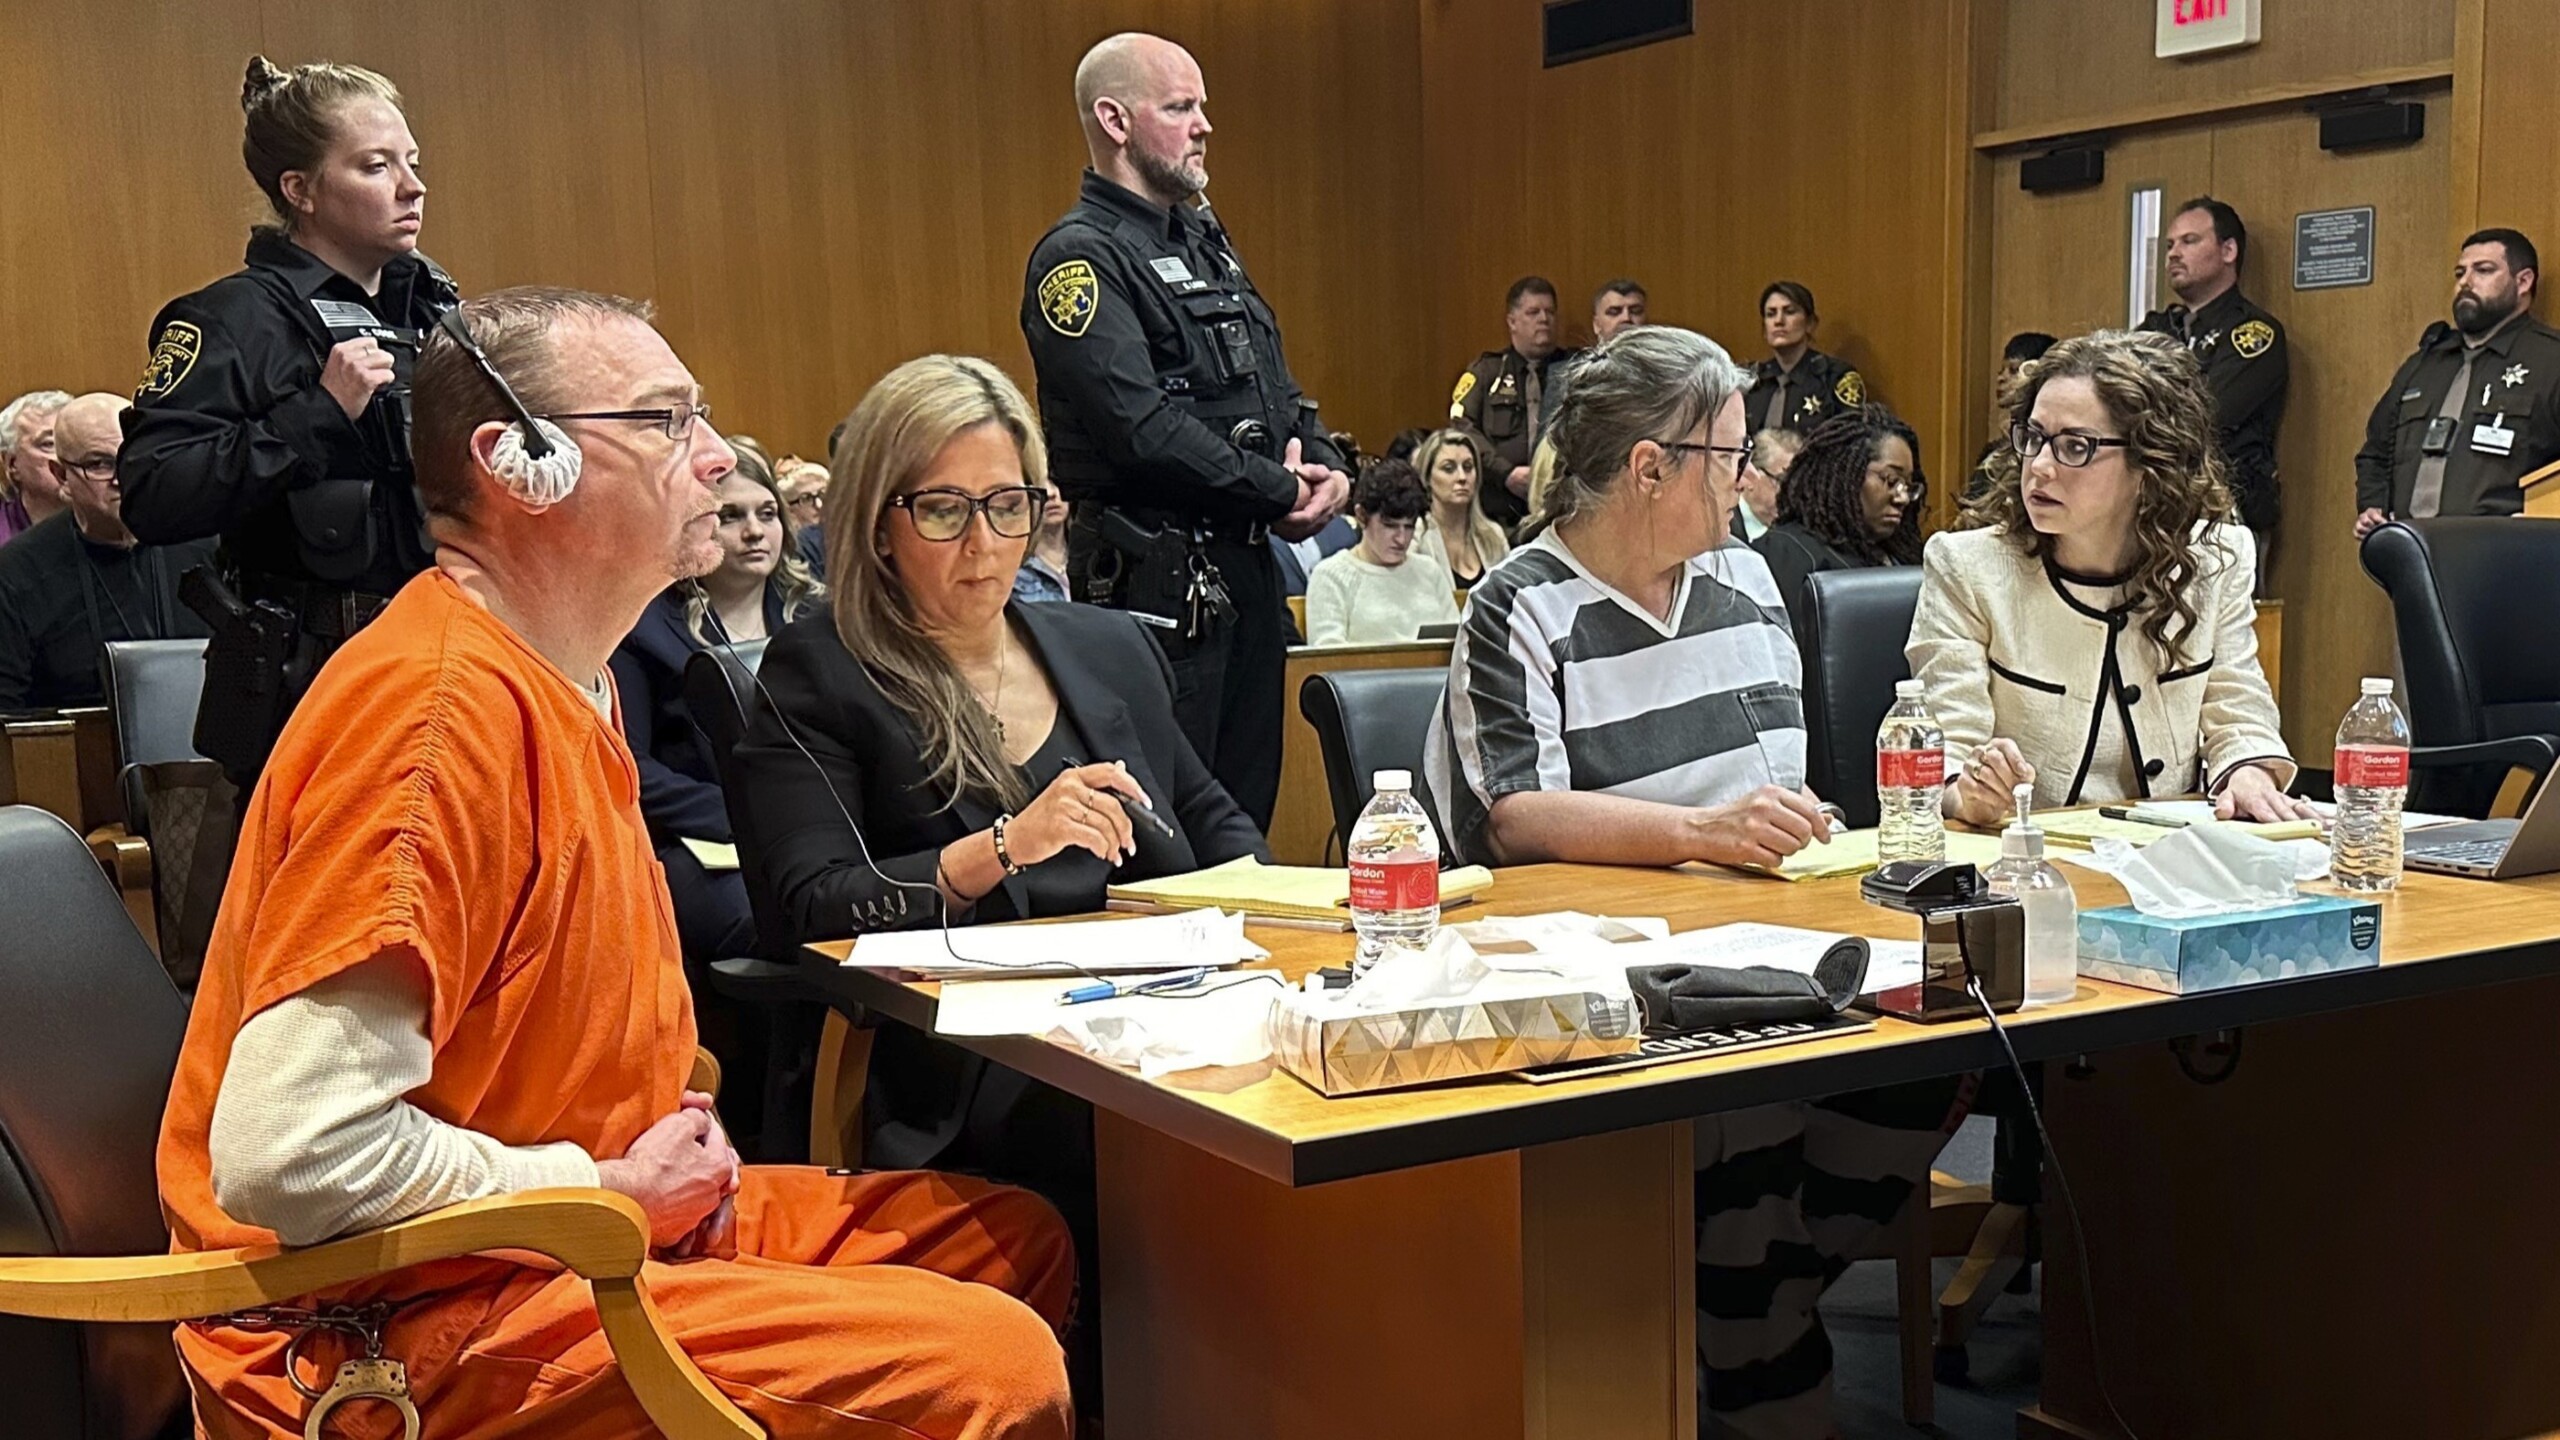 From left, James Crumbley, defense lawyer Mariell Lehman, Jennifer Crumbley and defense lawyer Shannon Smith await sentencing in Oakland County, Michigan, court on Tuesday, April 9, 2024. The Crumbleys were convicted of involuntary manslaughter for a school shooting committed by their son in 2021. | Ed White, AP